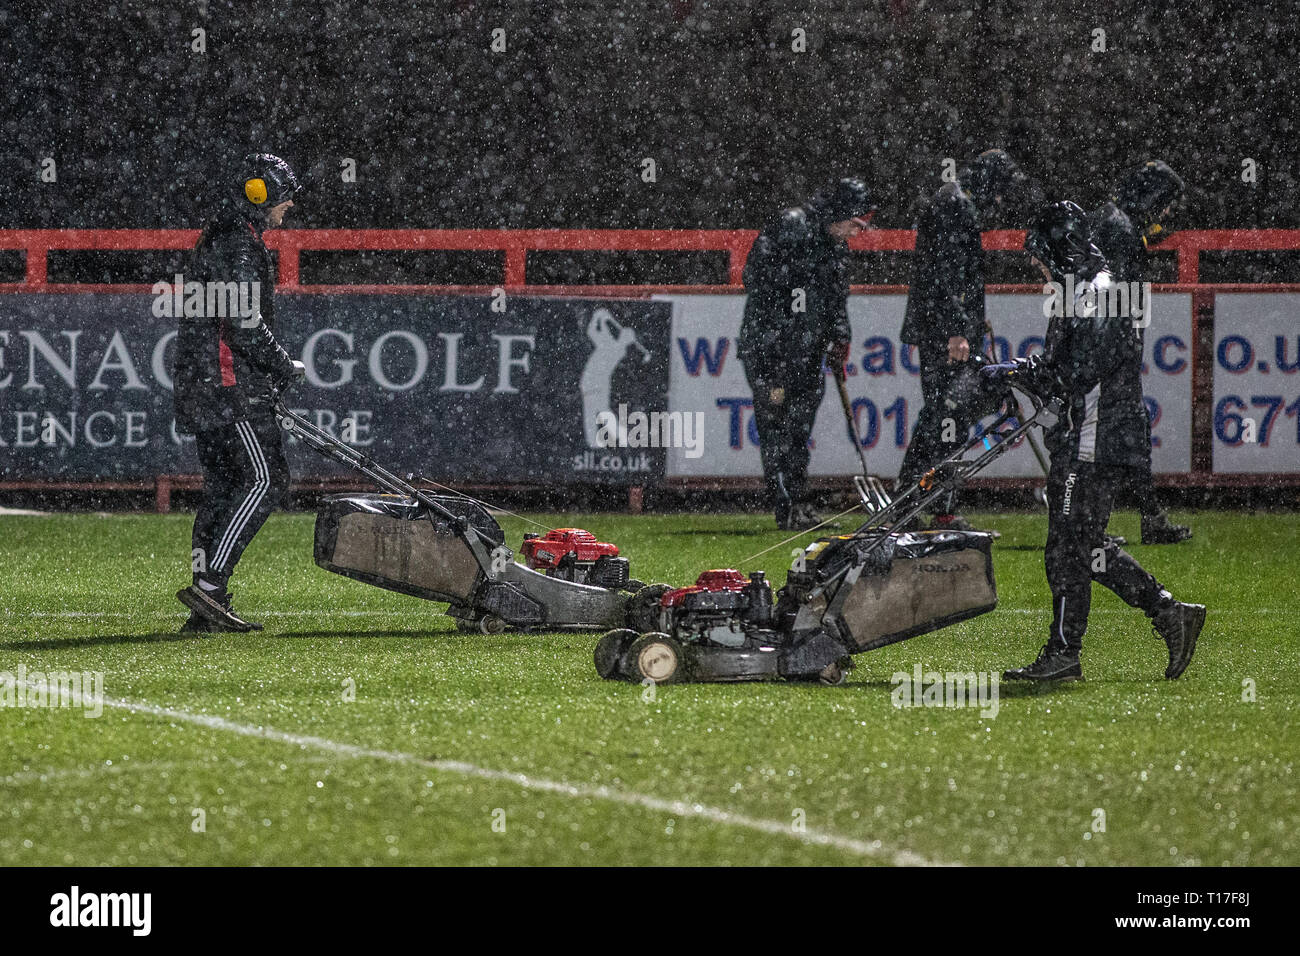 Ground staff cutting and maintaining grass on football pitch in heavy rain Stock Photo